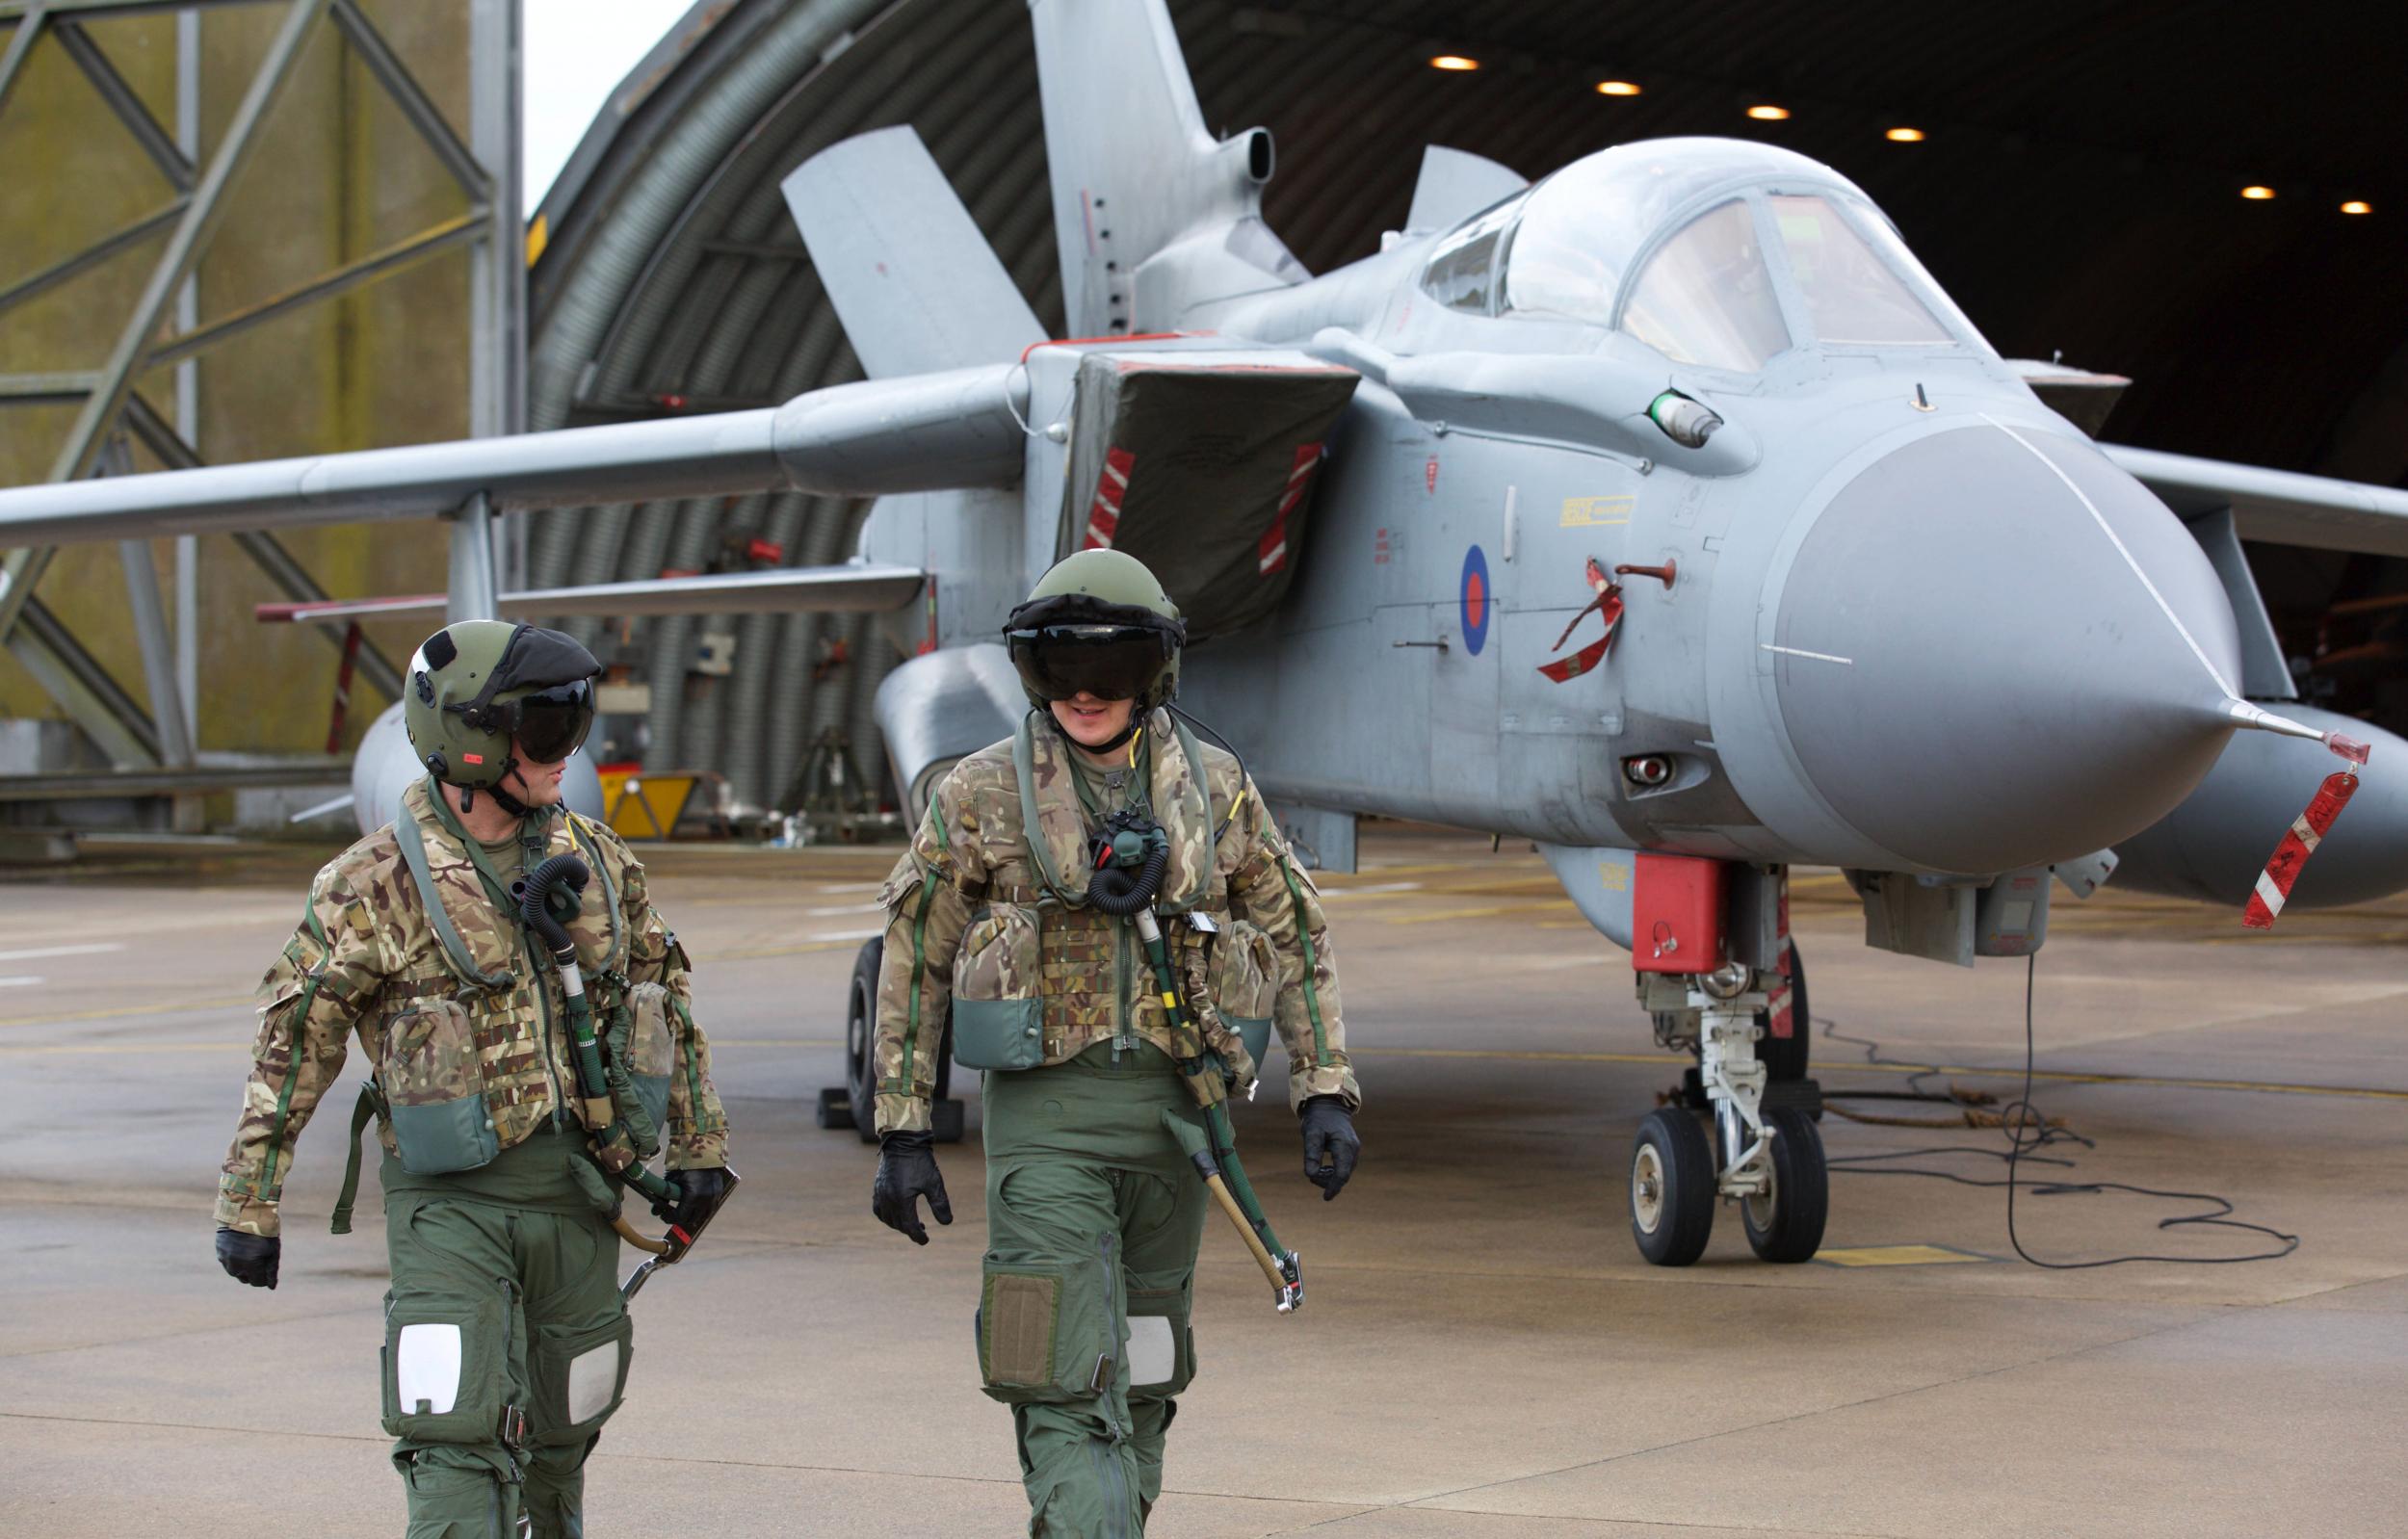 British fighters are used to face down the Russian military in Eastern Europe